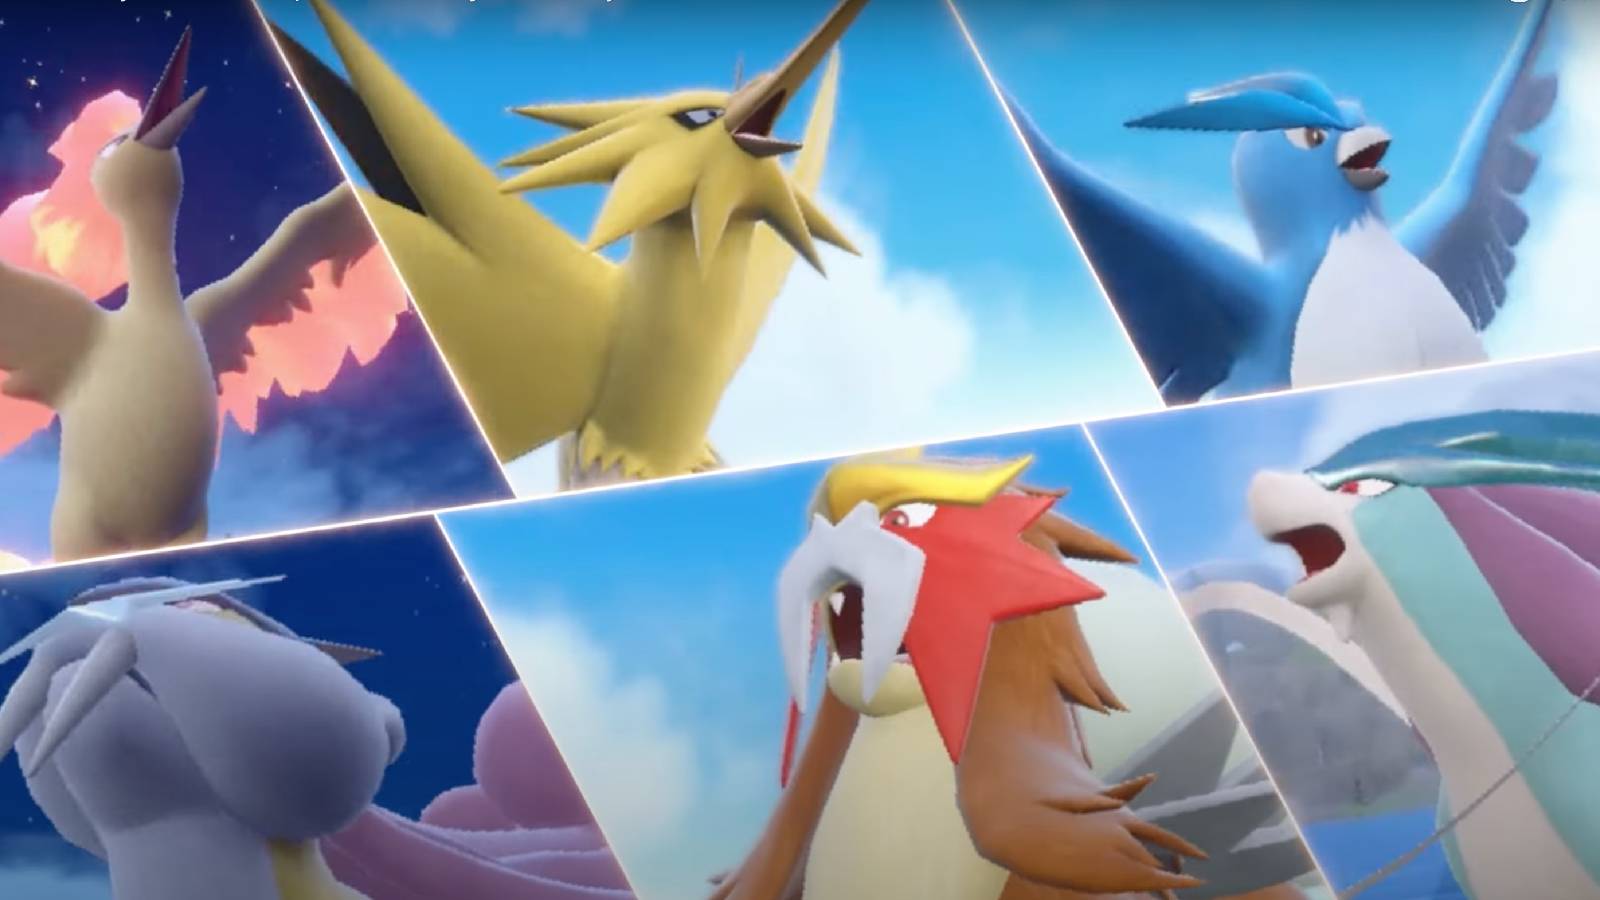 The image is split into six loosely square sections, with each picturing one od the following legendary Pokemon: Moltres, Zapdos, Articuno, Entei, Suicune, and Raikou